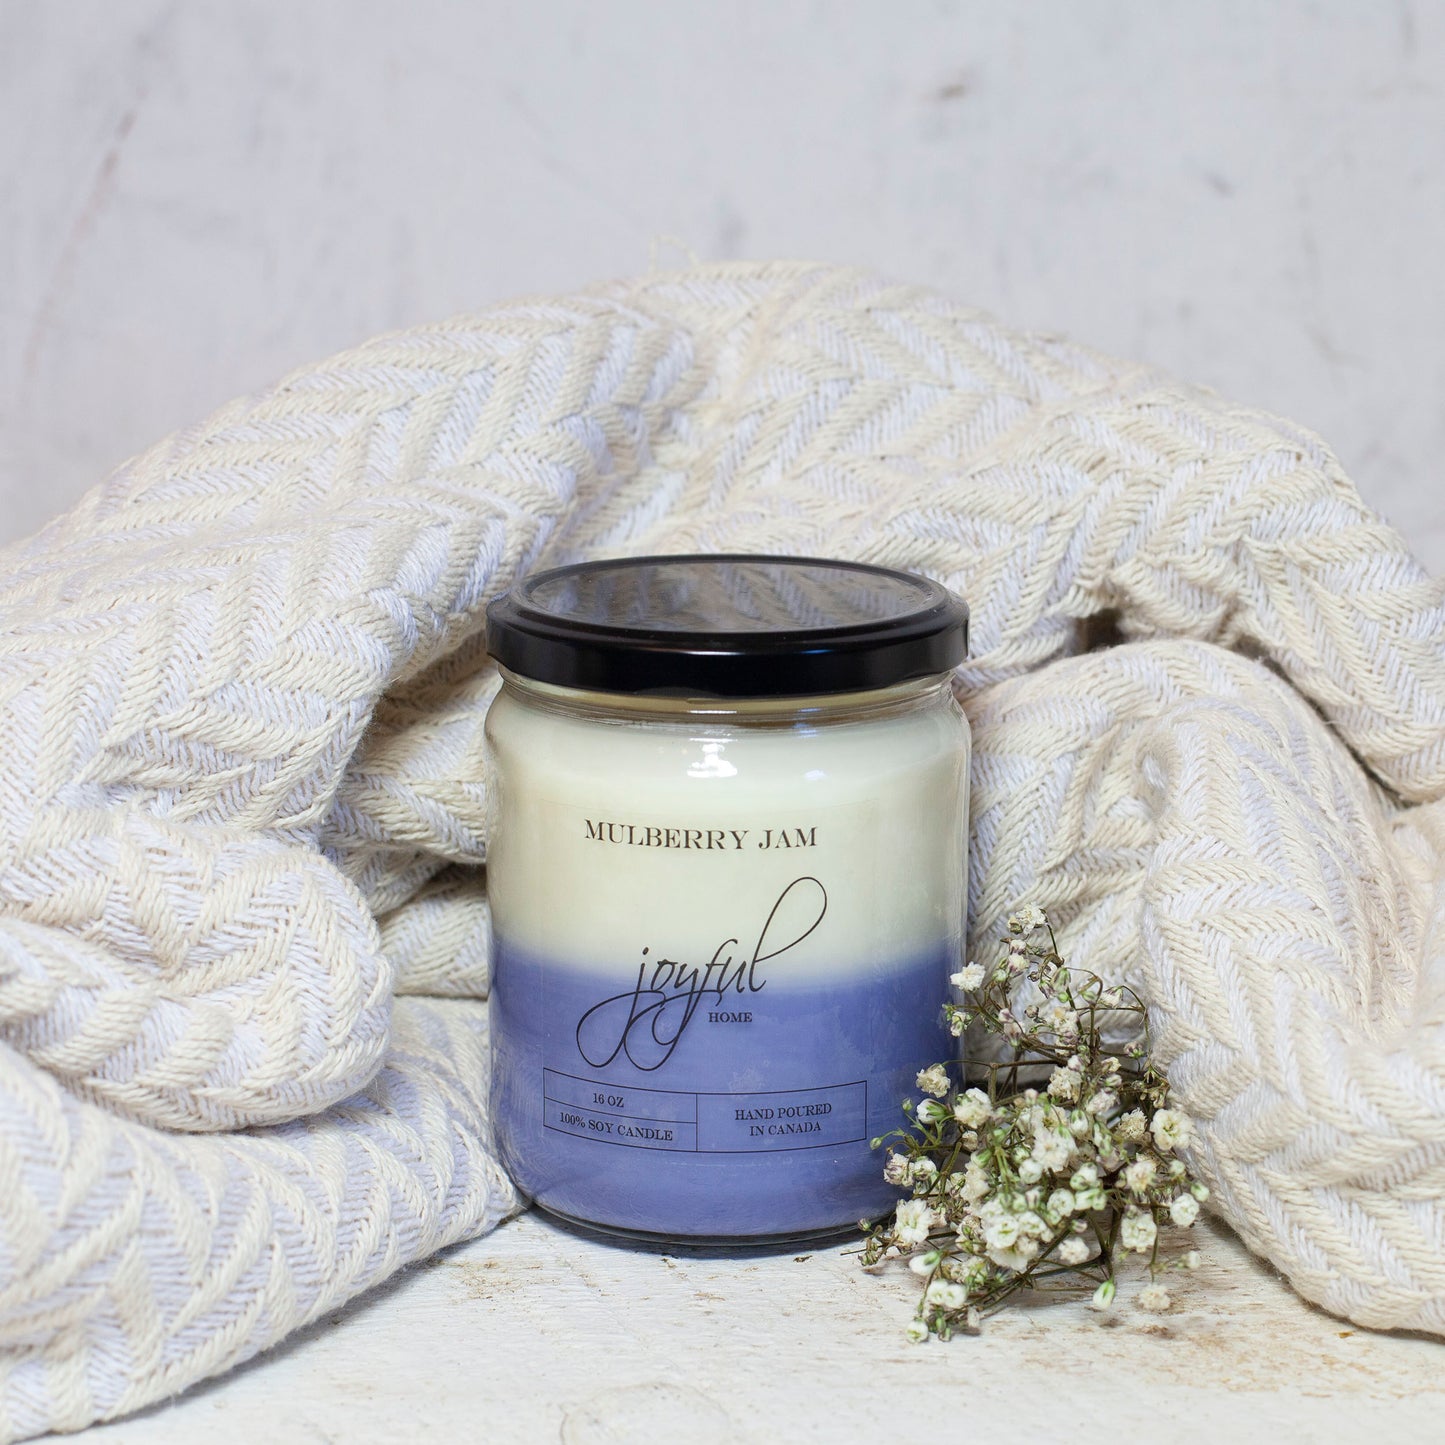 Mulberry Jam Sow Wax Candle